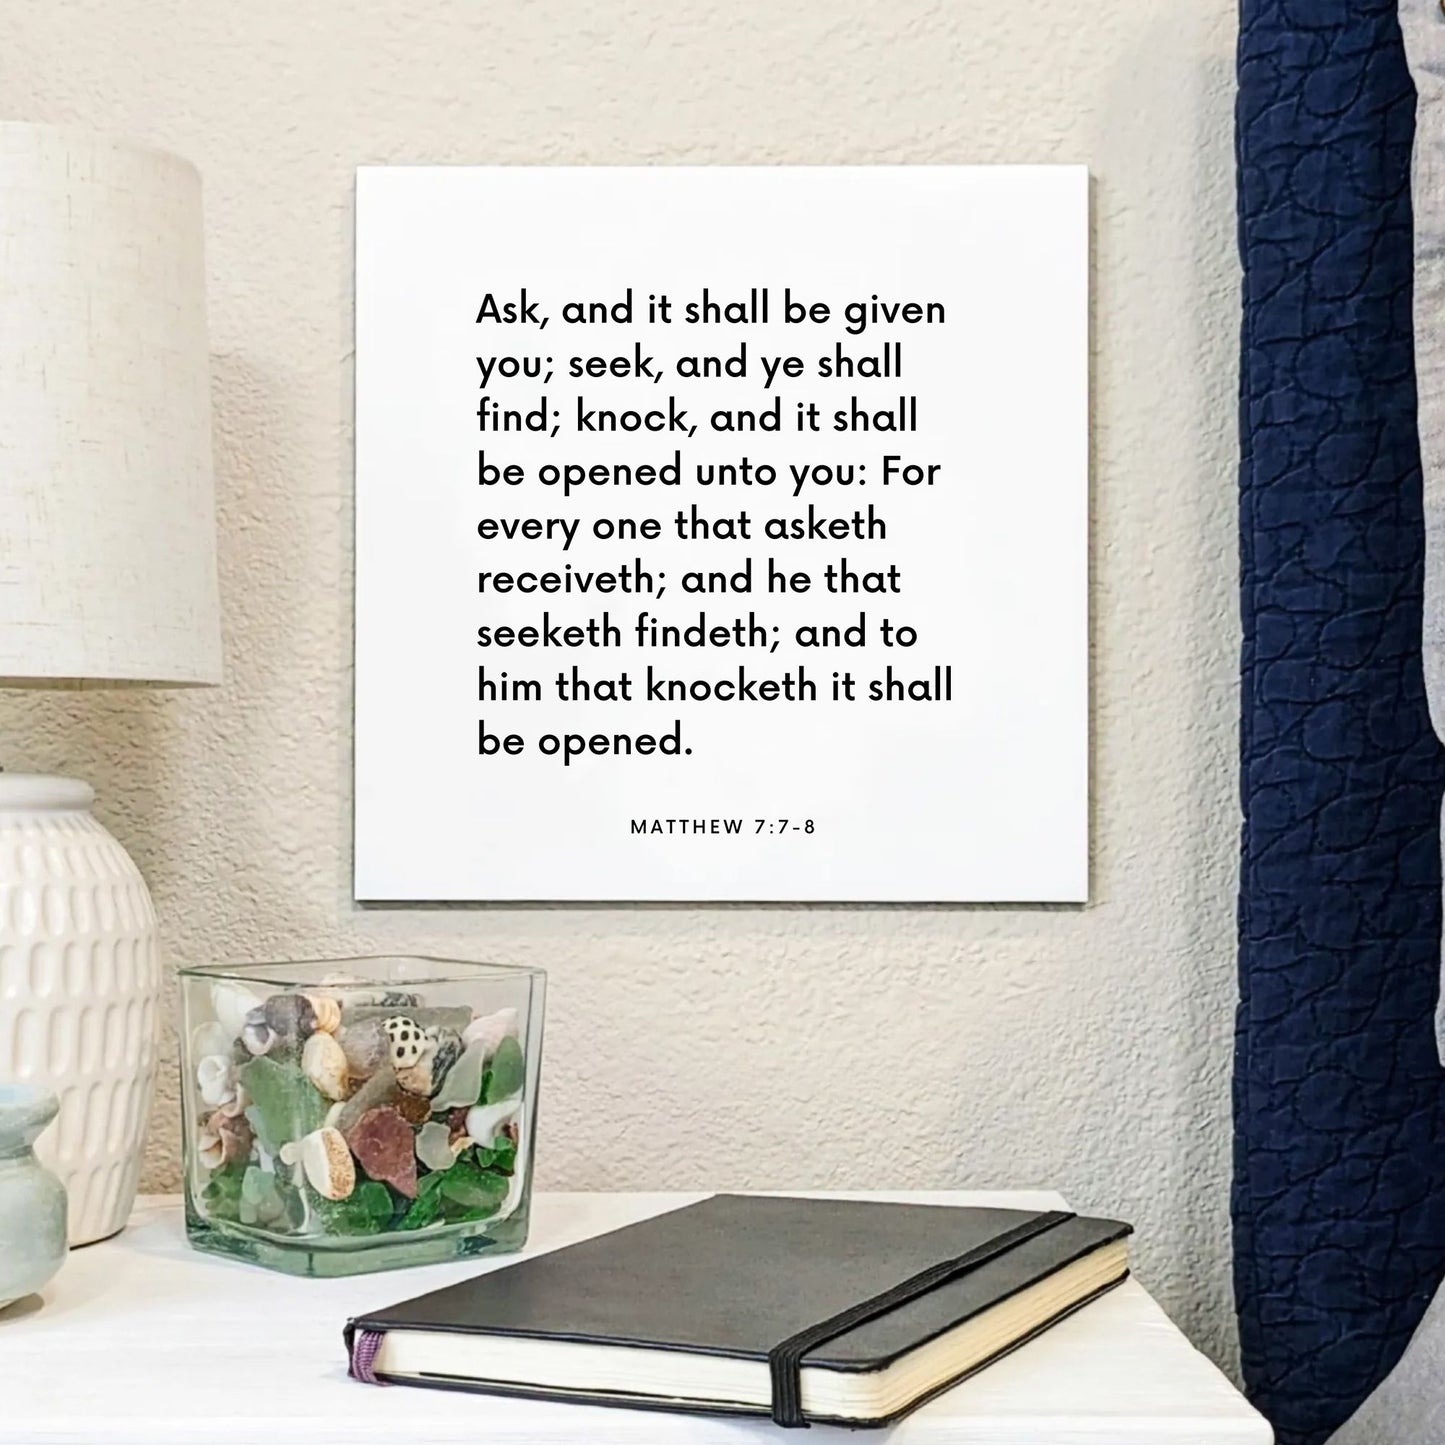 Bedside mouting of the scripture tile for Matthew 7:7-8 - "Every one that asketh receiveth; and he that seeketh findeth"